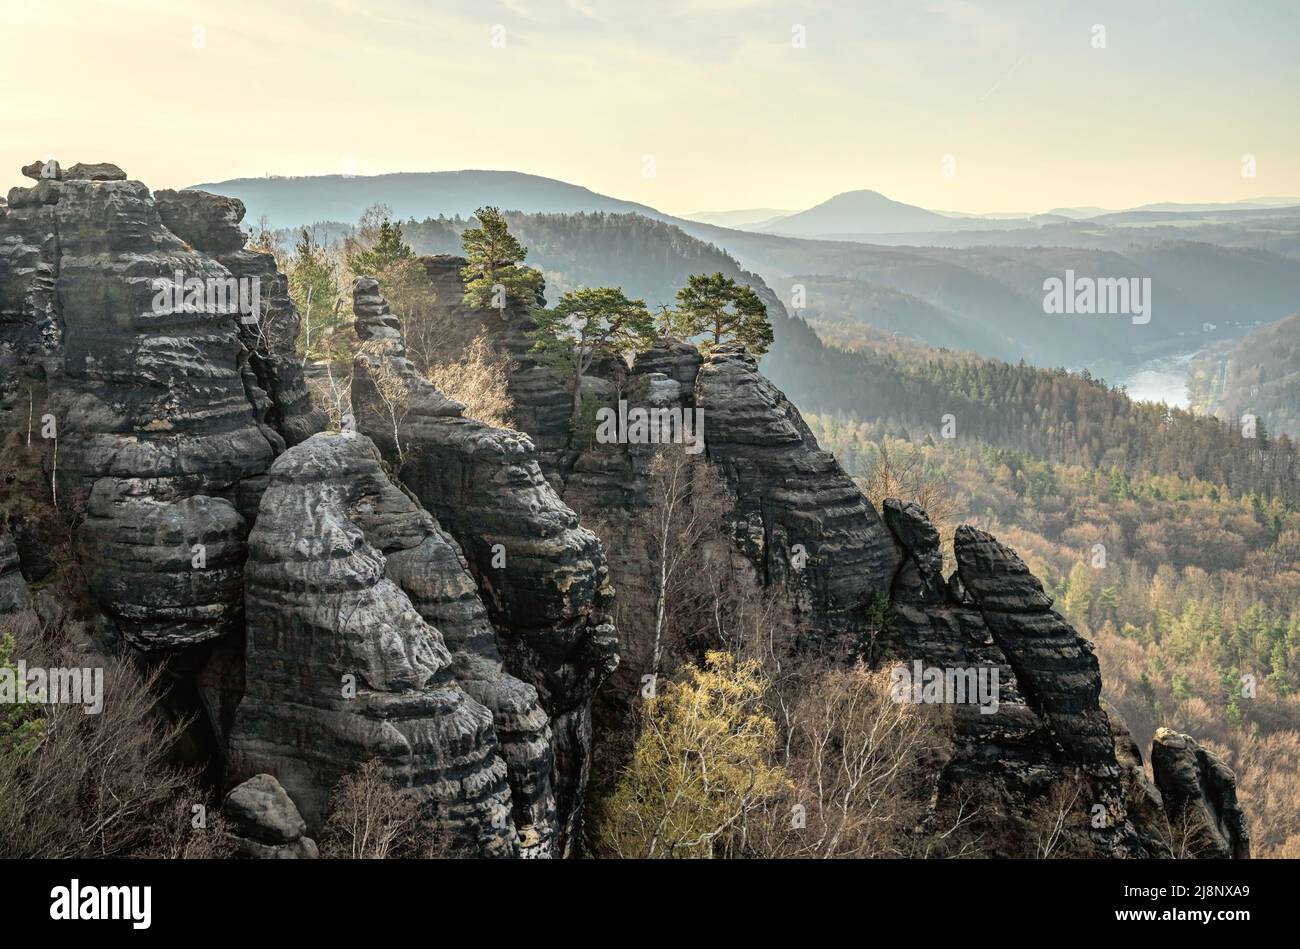 View from the Schrammsteinaussicht at the Saxon Switzerland National Park, Saxony, Germany Stock Photo